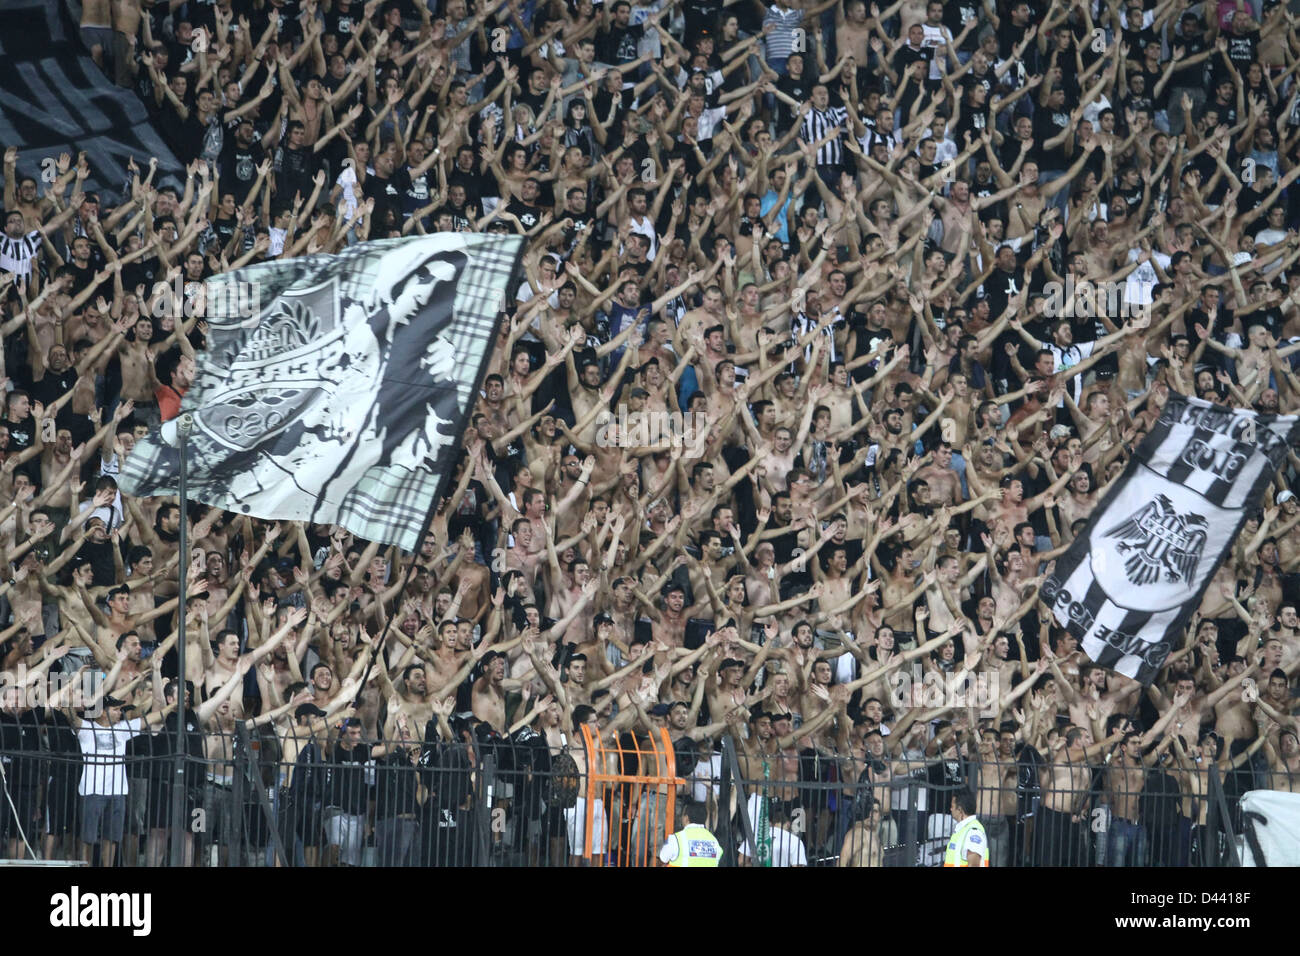 GREECE, THESSALONIKI-AUGUST 23: Paok FC fans against Rapid Wien, during their first leg of the UEFA Europa League playoff footba Stock Photo